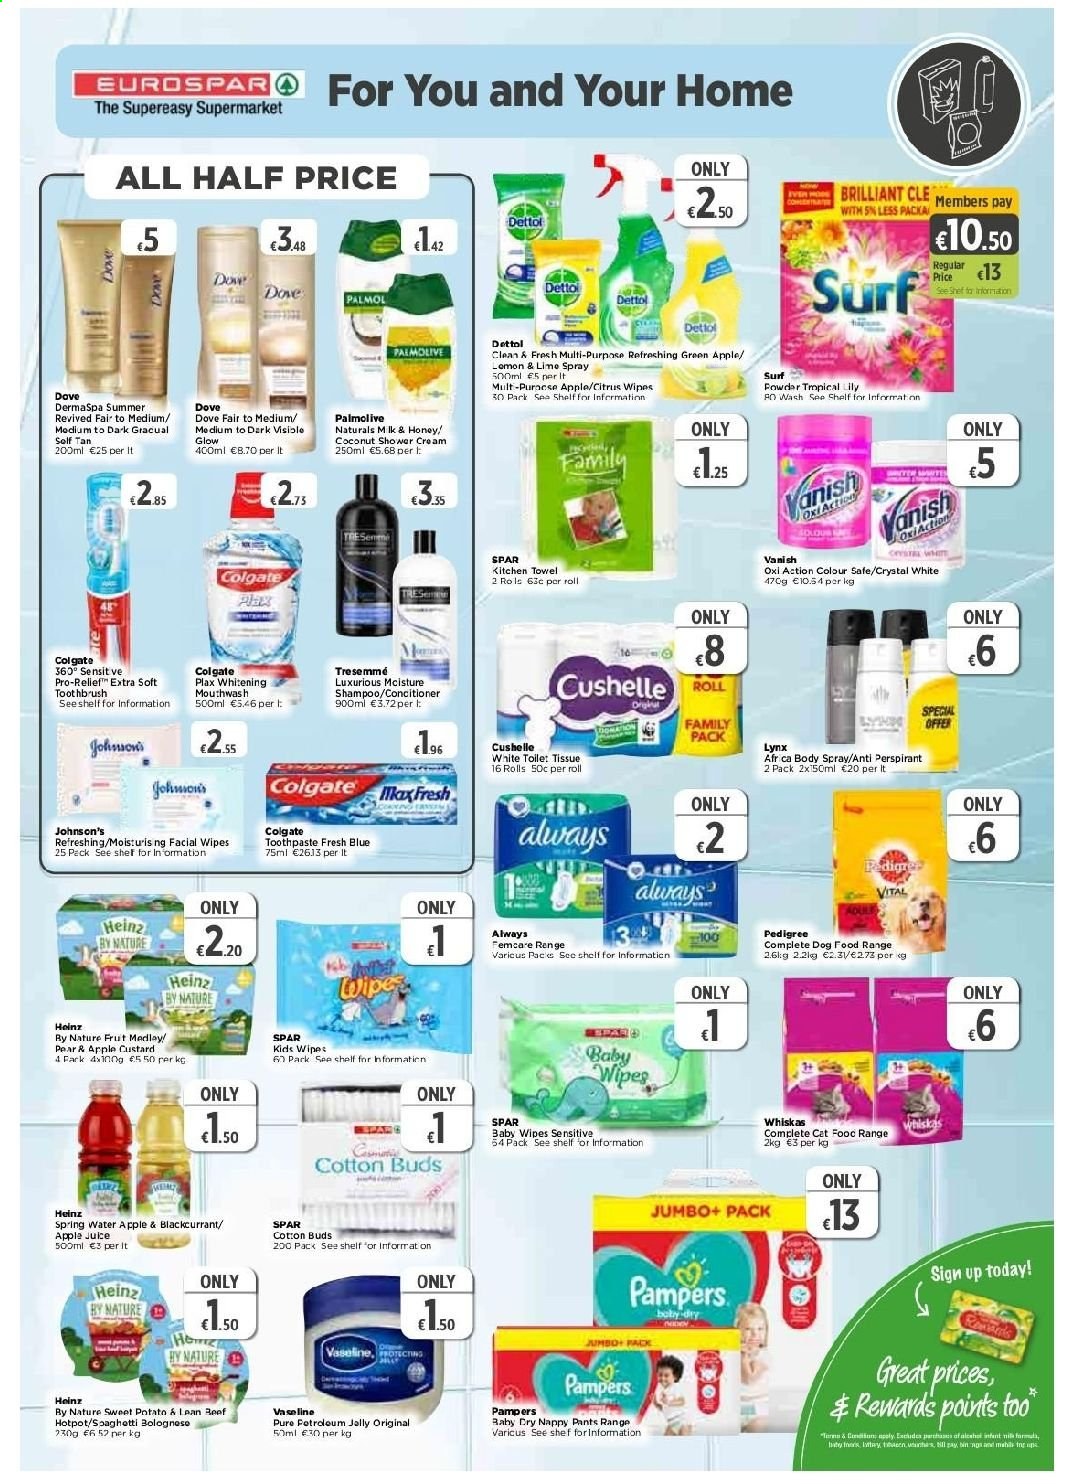 EUROSPAR offer  - 27.5.2021 - 16.6.2021 - Sales products - custard, Heinz, honey, juice, wipes, Pampers, pants, baby wipes, nappies, Johnson's, Dettol, Dove, tissues, kitchen towels, Cushelle, Vanish, Surf, shampoo, Palmolive, Vaseline, Colgate, toothbrush, toothpaste, mouthwash, Plax, TRESemmé, body spray, bin, animal food, dog food, Whiskas, Pedigree. Page 7.